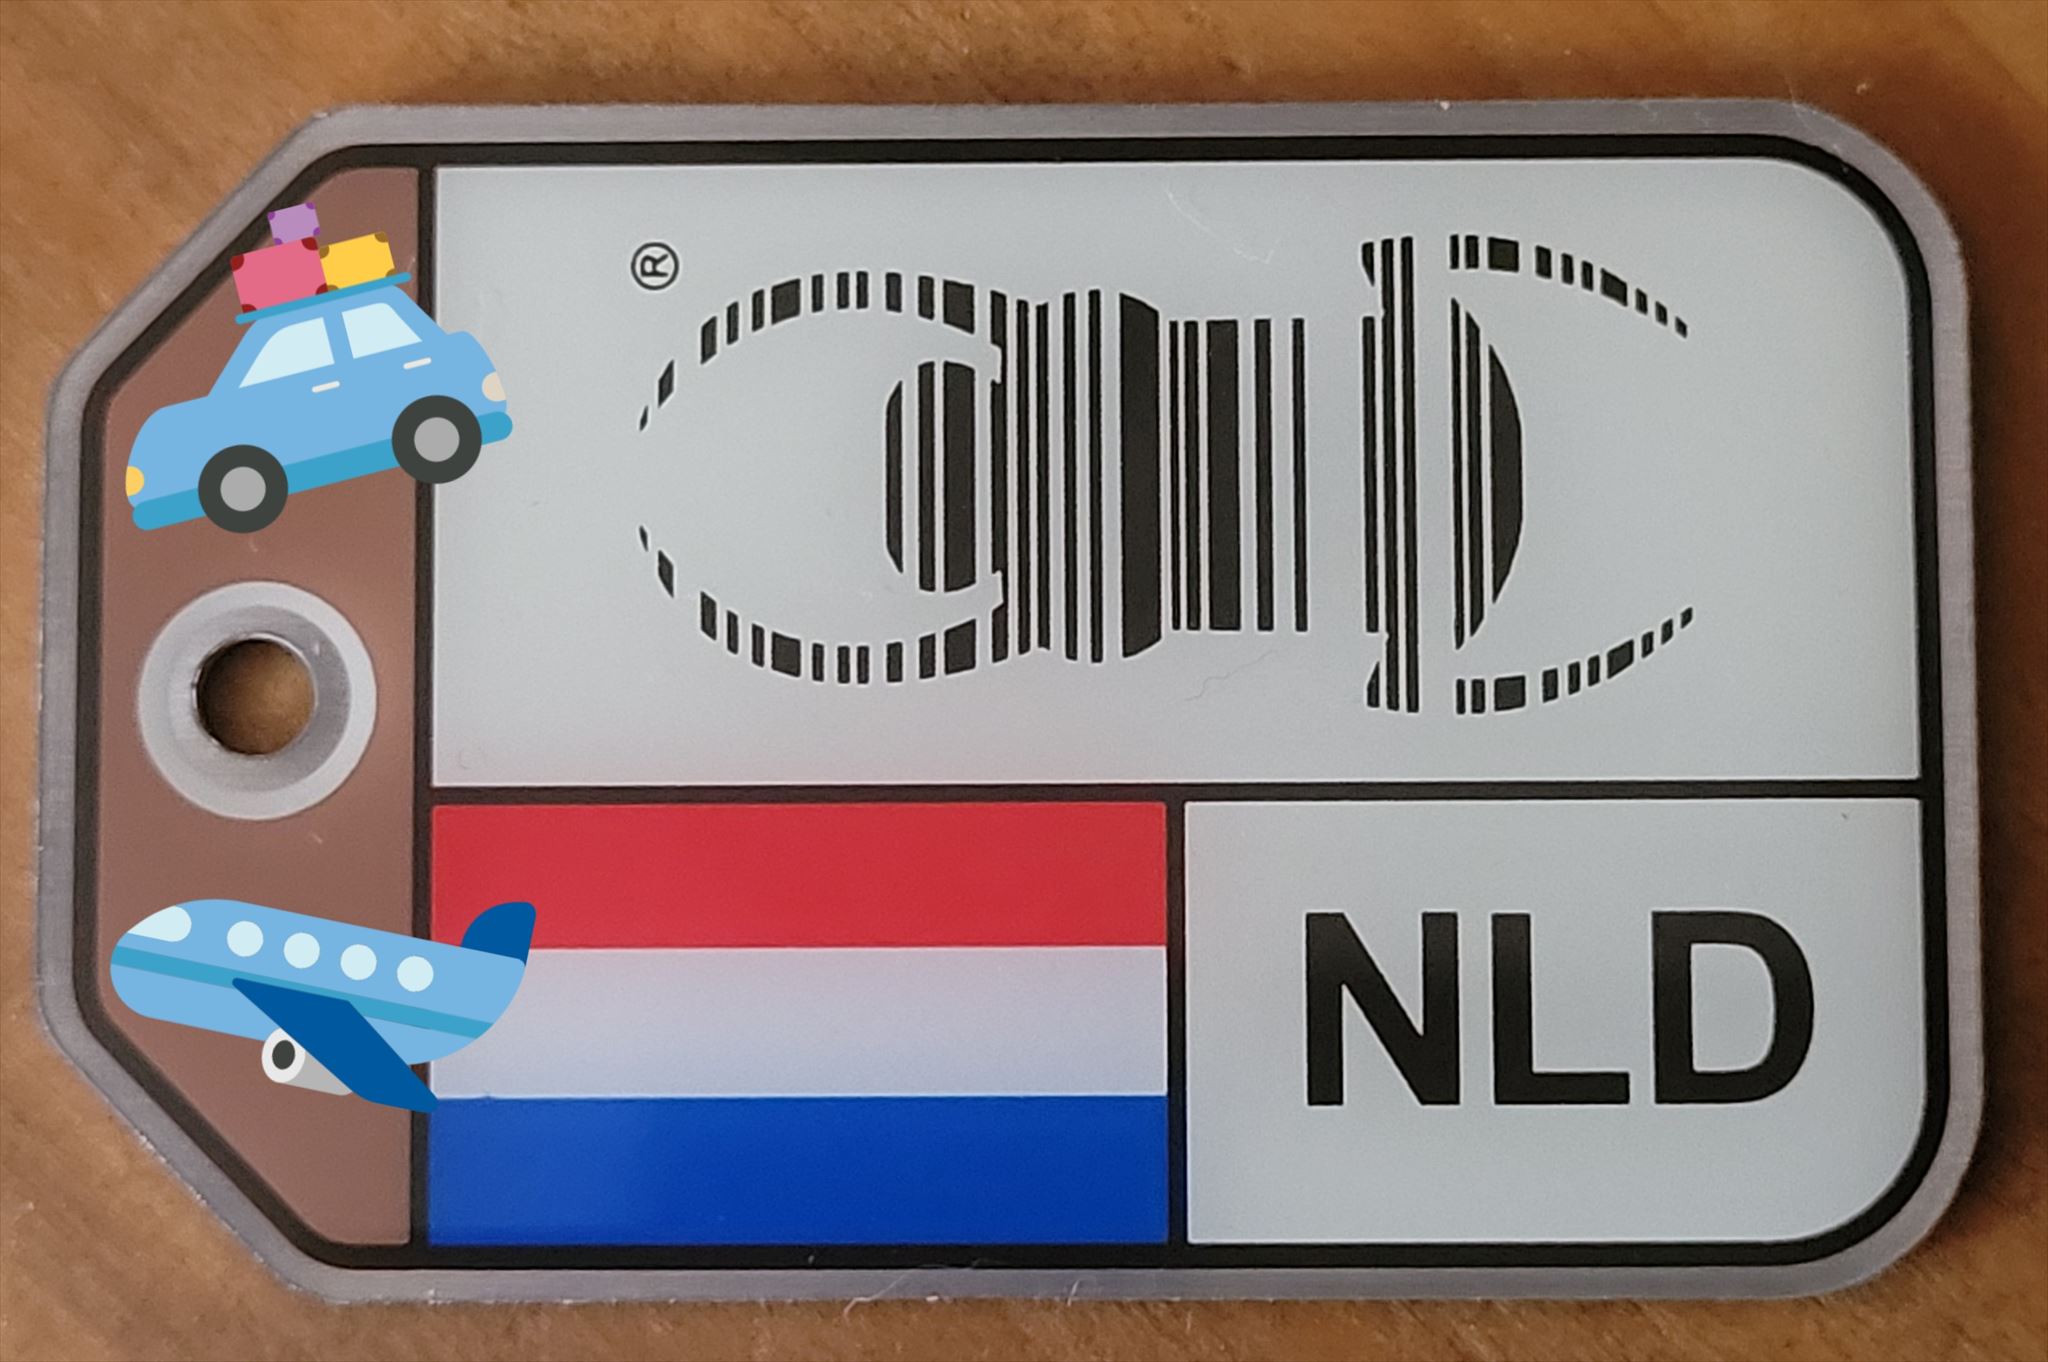 Hello Geocacher, Greetings from the Netherlands! I hope this message finds you well. I noticed that you've come across a geocache trackable, and I was wondering if you could help it make its way back to the Netherlands, specifically near our hometown, Schagen, North Holland. This trackable embarked on its journey in New Zealand, and it would be fantastic to see it return to our region. If you're able to assist, please consider placing it in a cache for its return journey to Europe, preferably in the vicinity of Schagen or a nearby location. Thank you very much for your help, and enjoy Geocaching!  Best regards, RoMo 1742